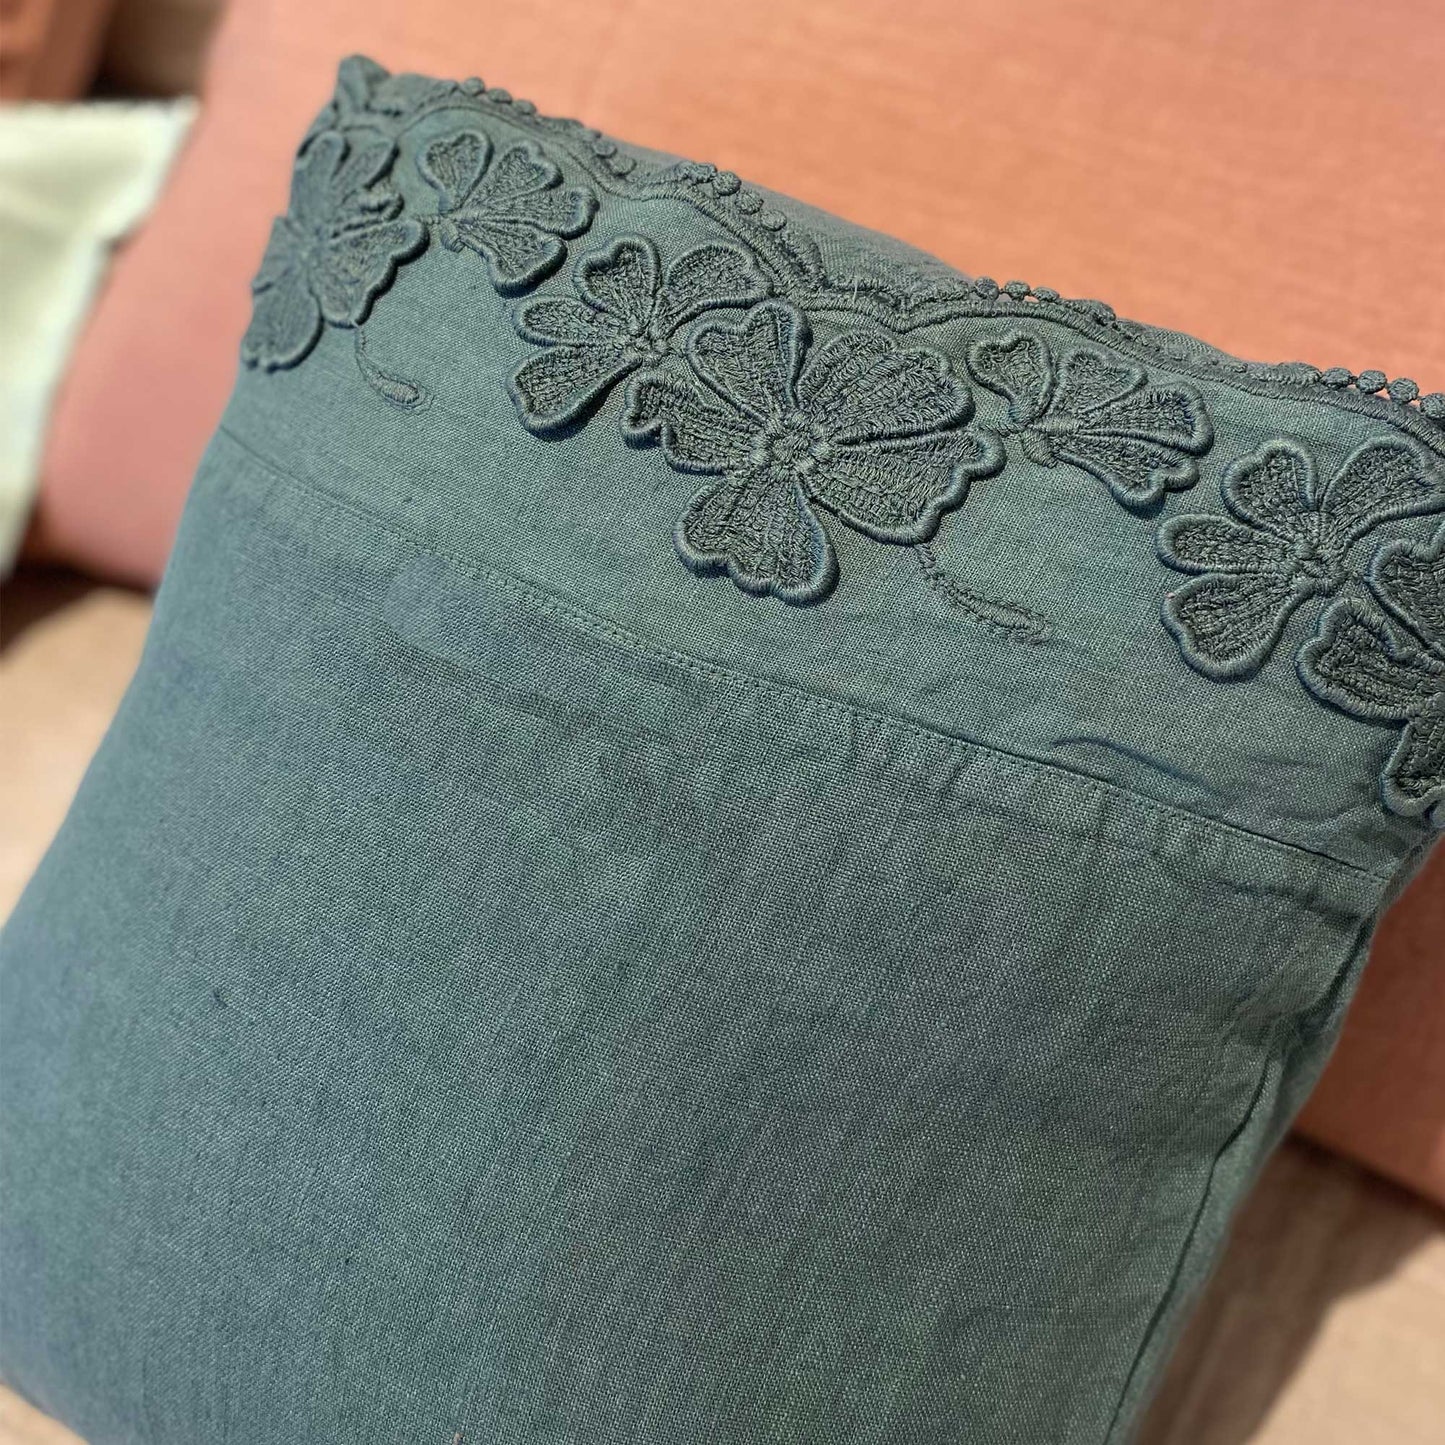 Pillowcase with Petals embroidery * while stocks last